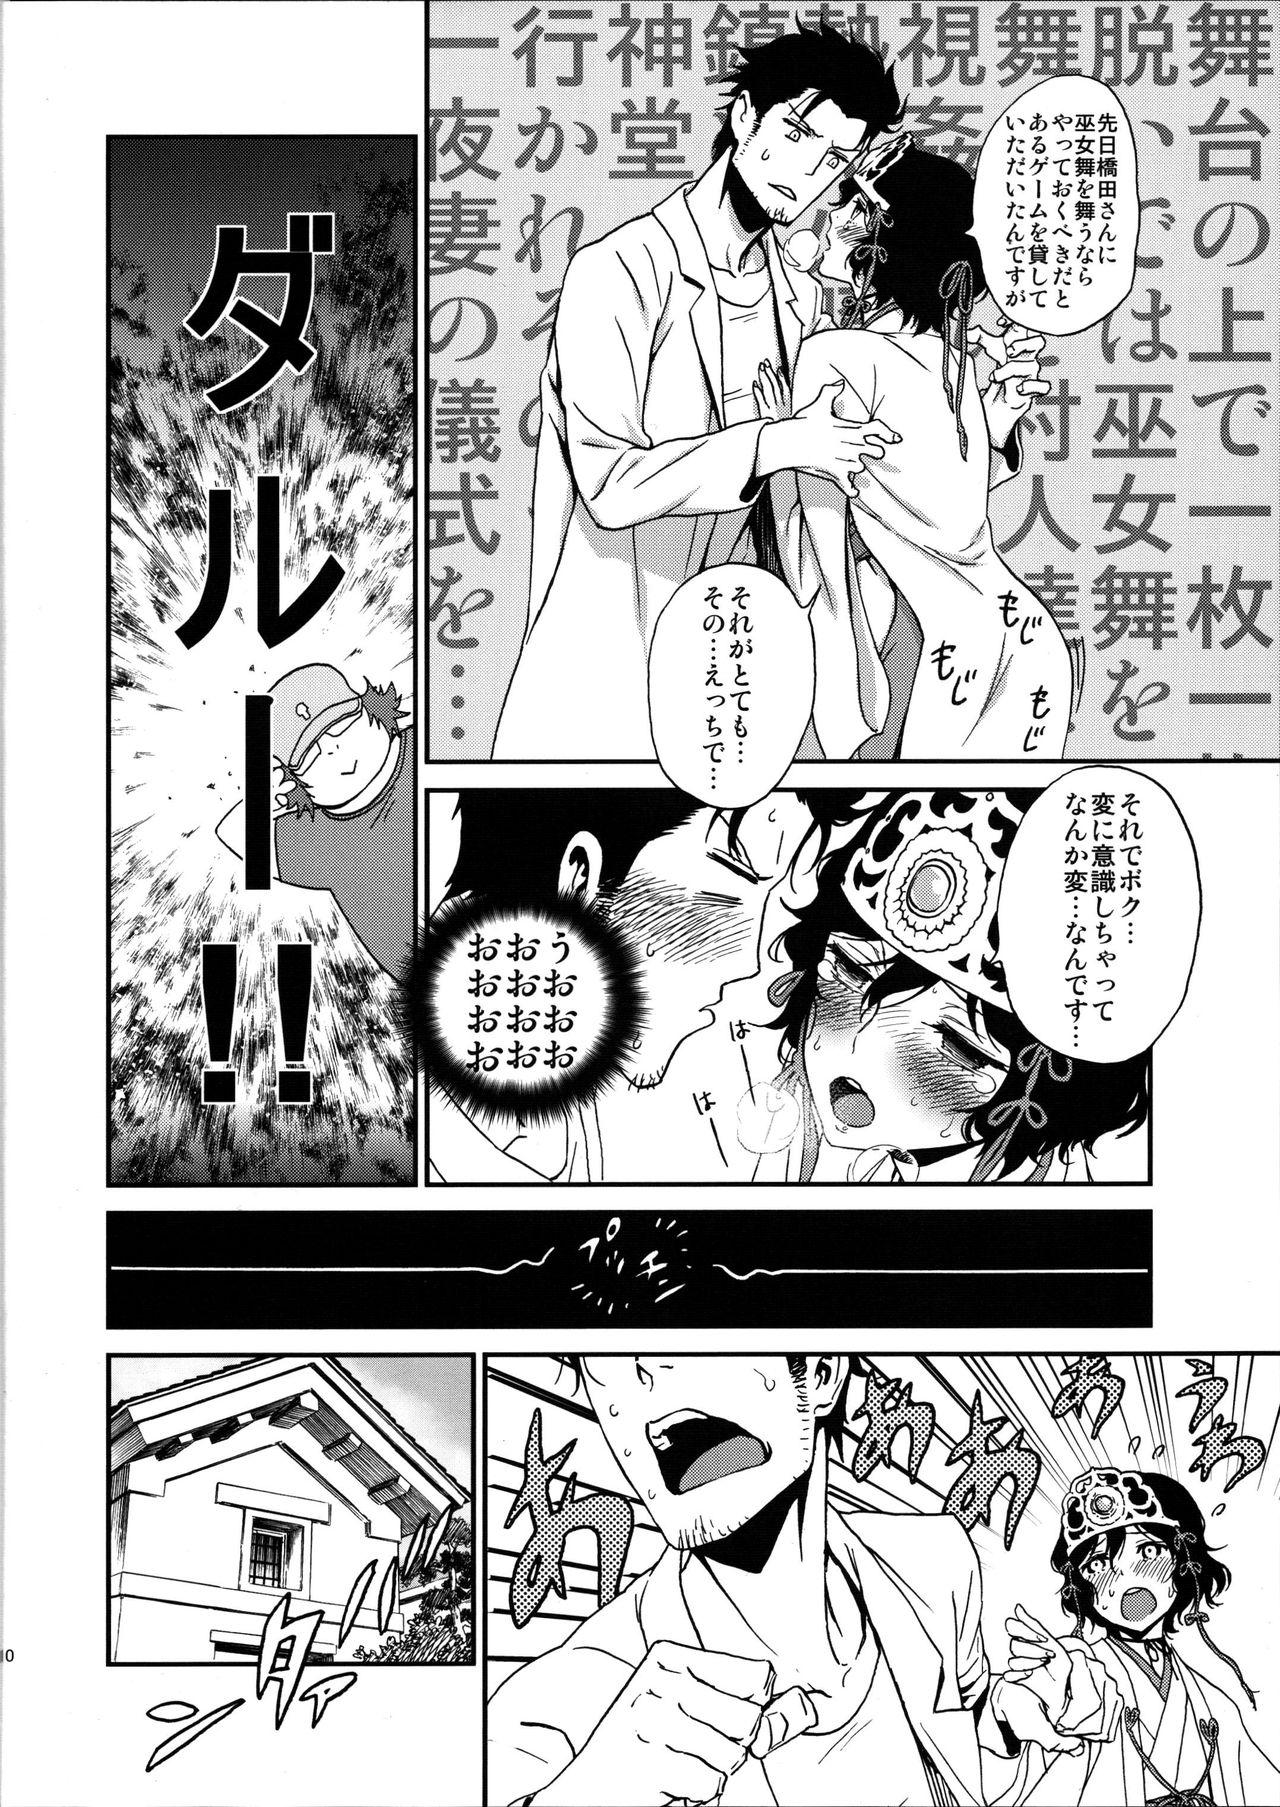 Three Some Yaotome no Chrysanthemum - Steinsgate Naked Sex - Page 9